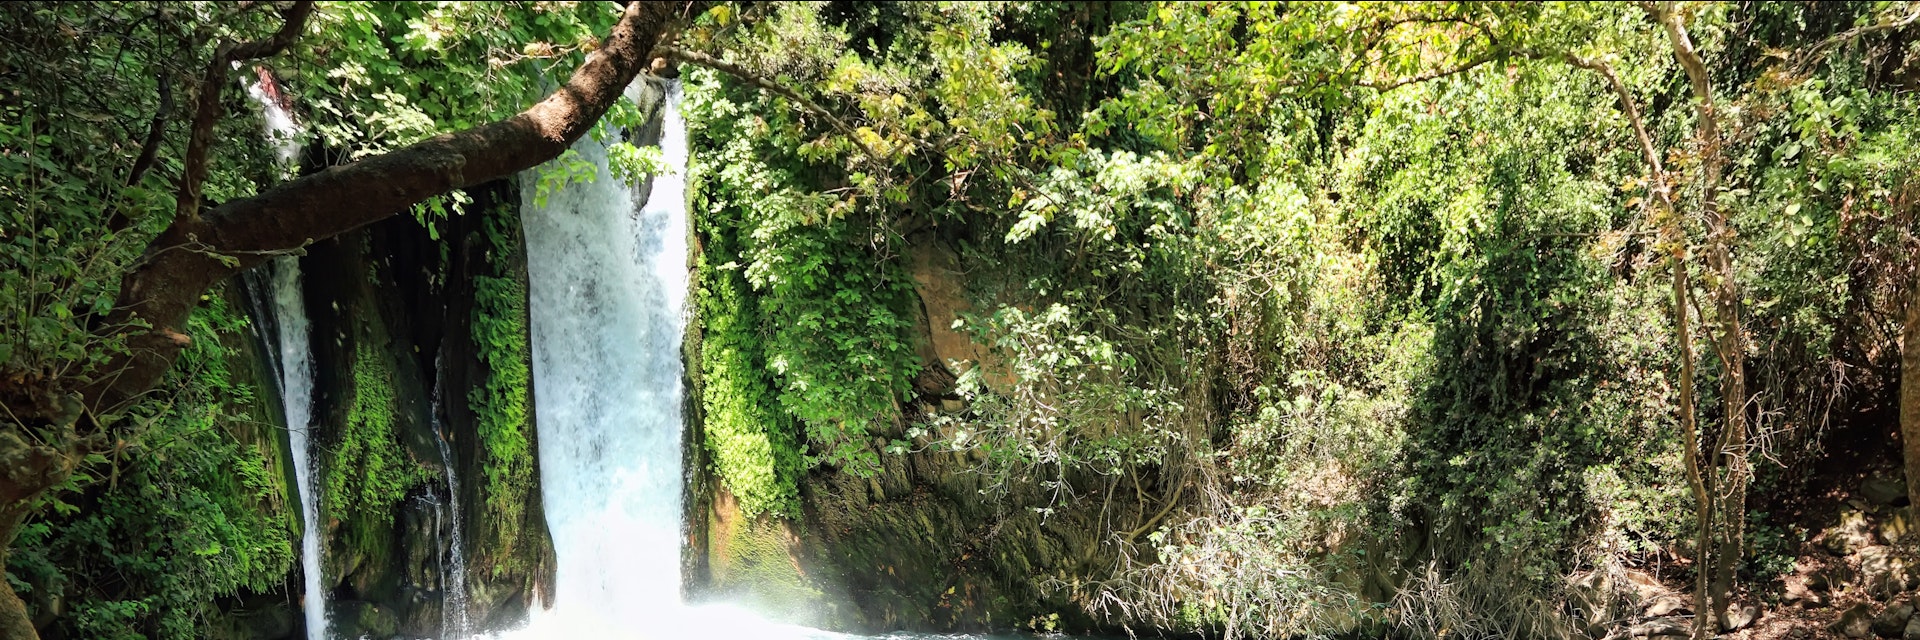 Waterfall in Banias Nature Reserve